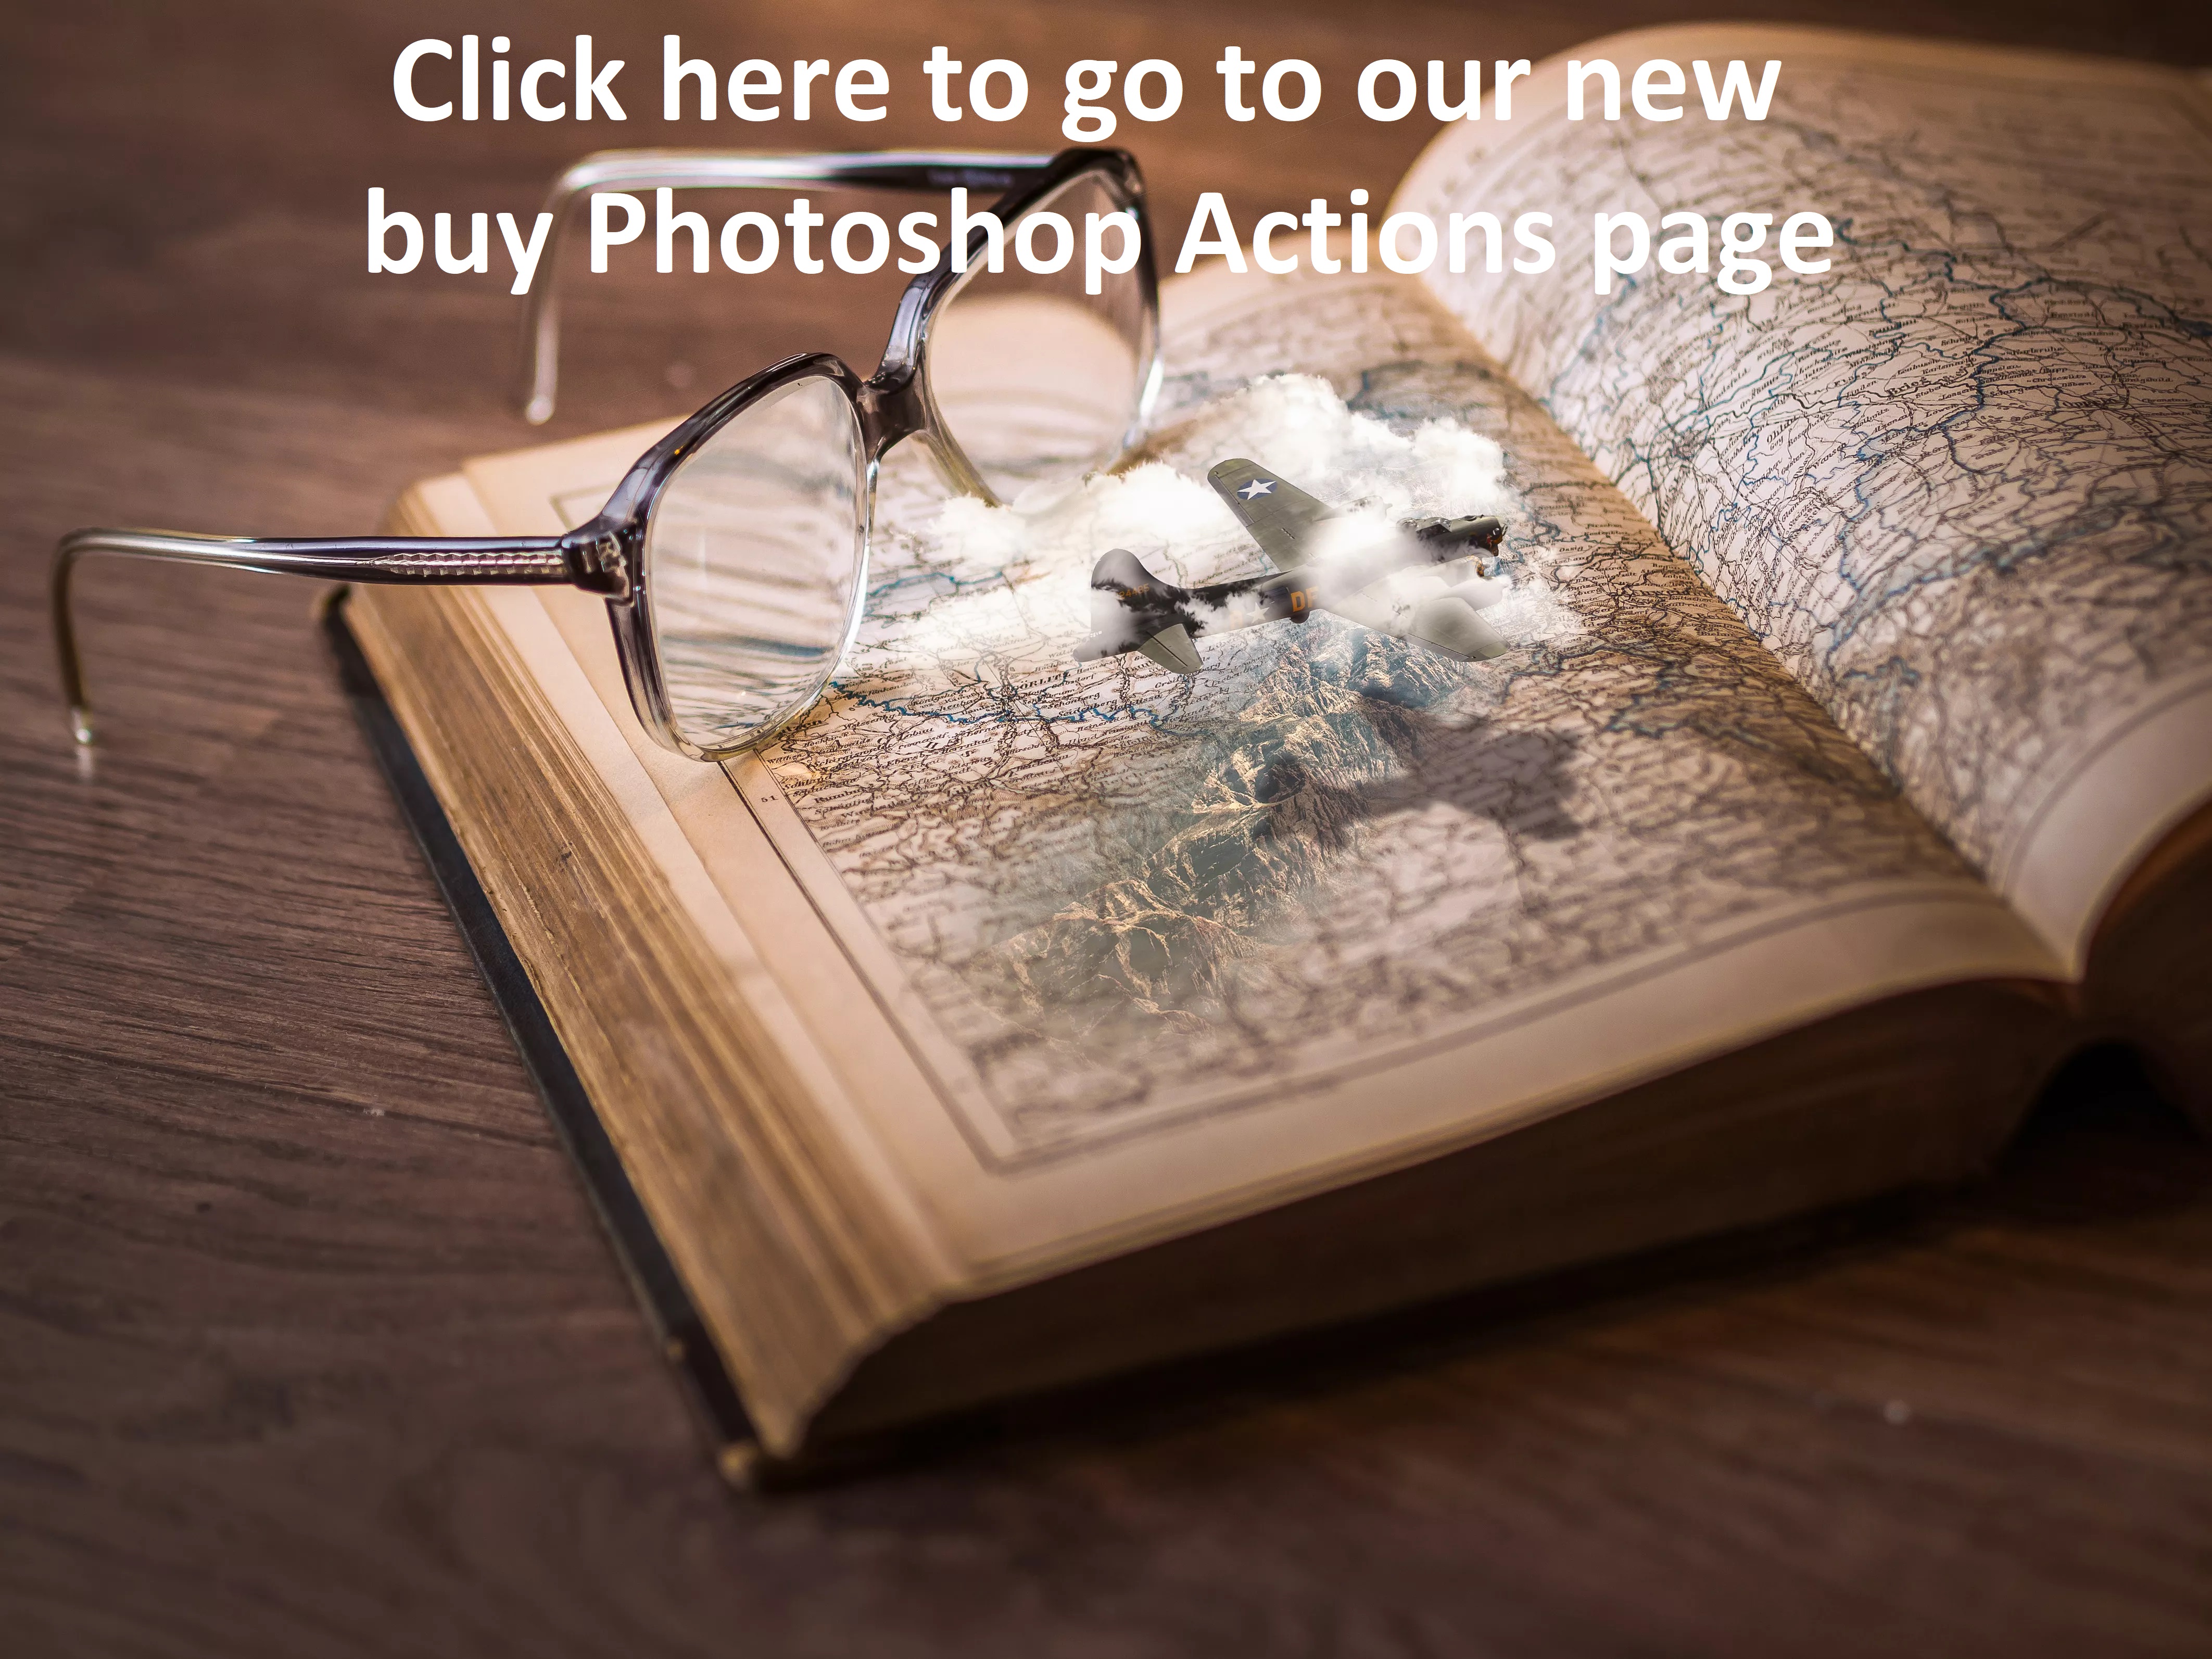 link to our new buy Photoshop Actions page